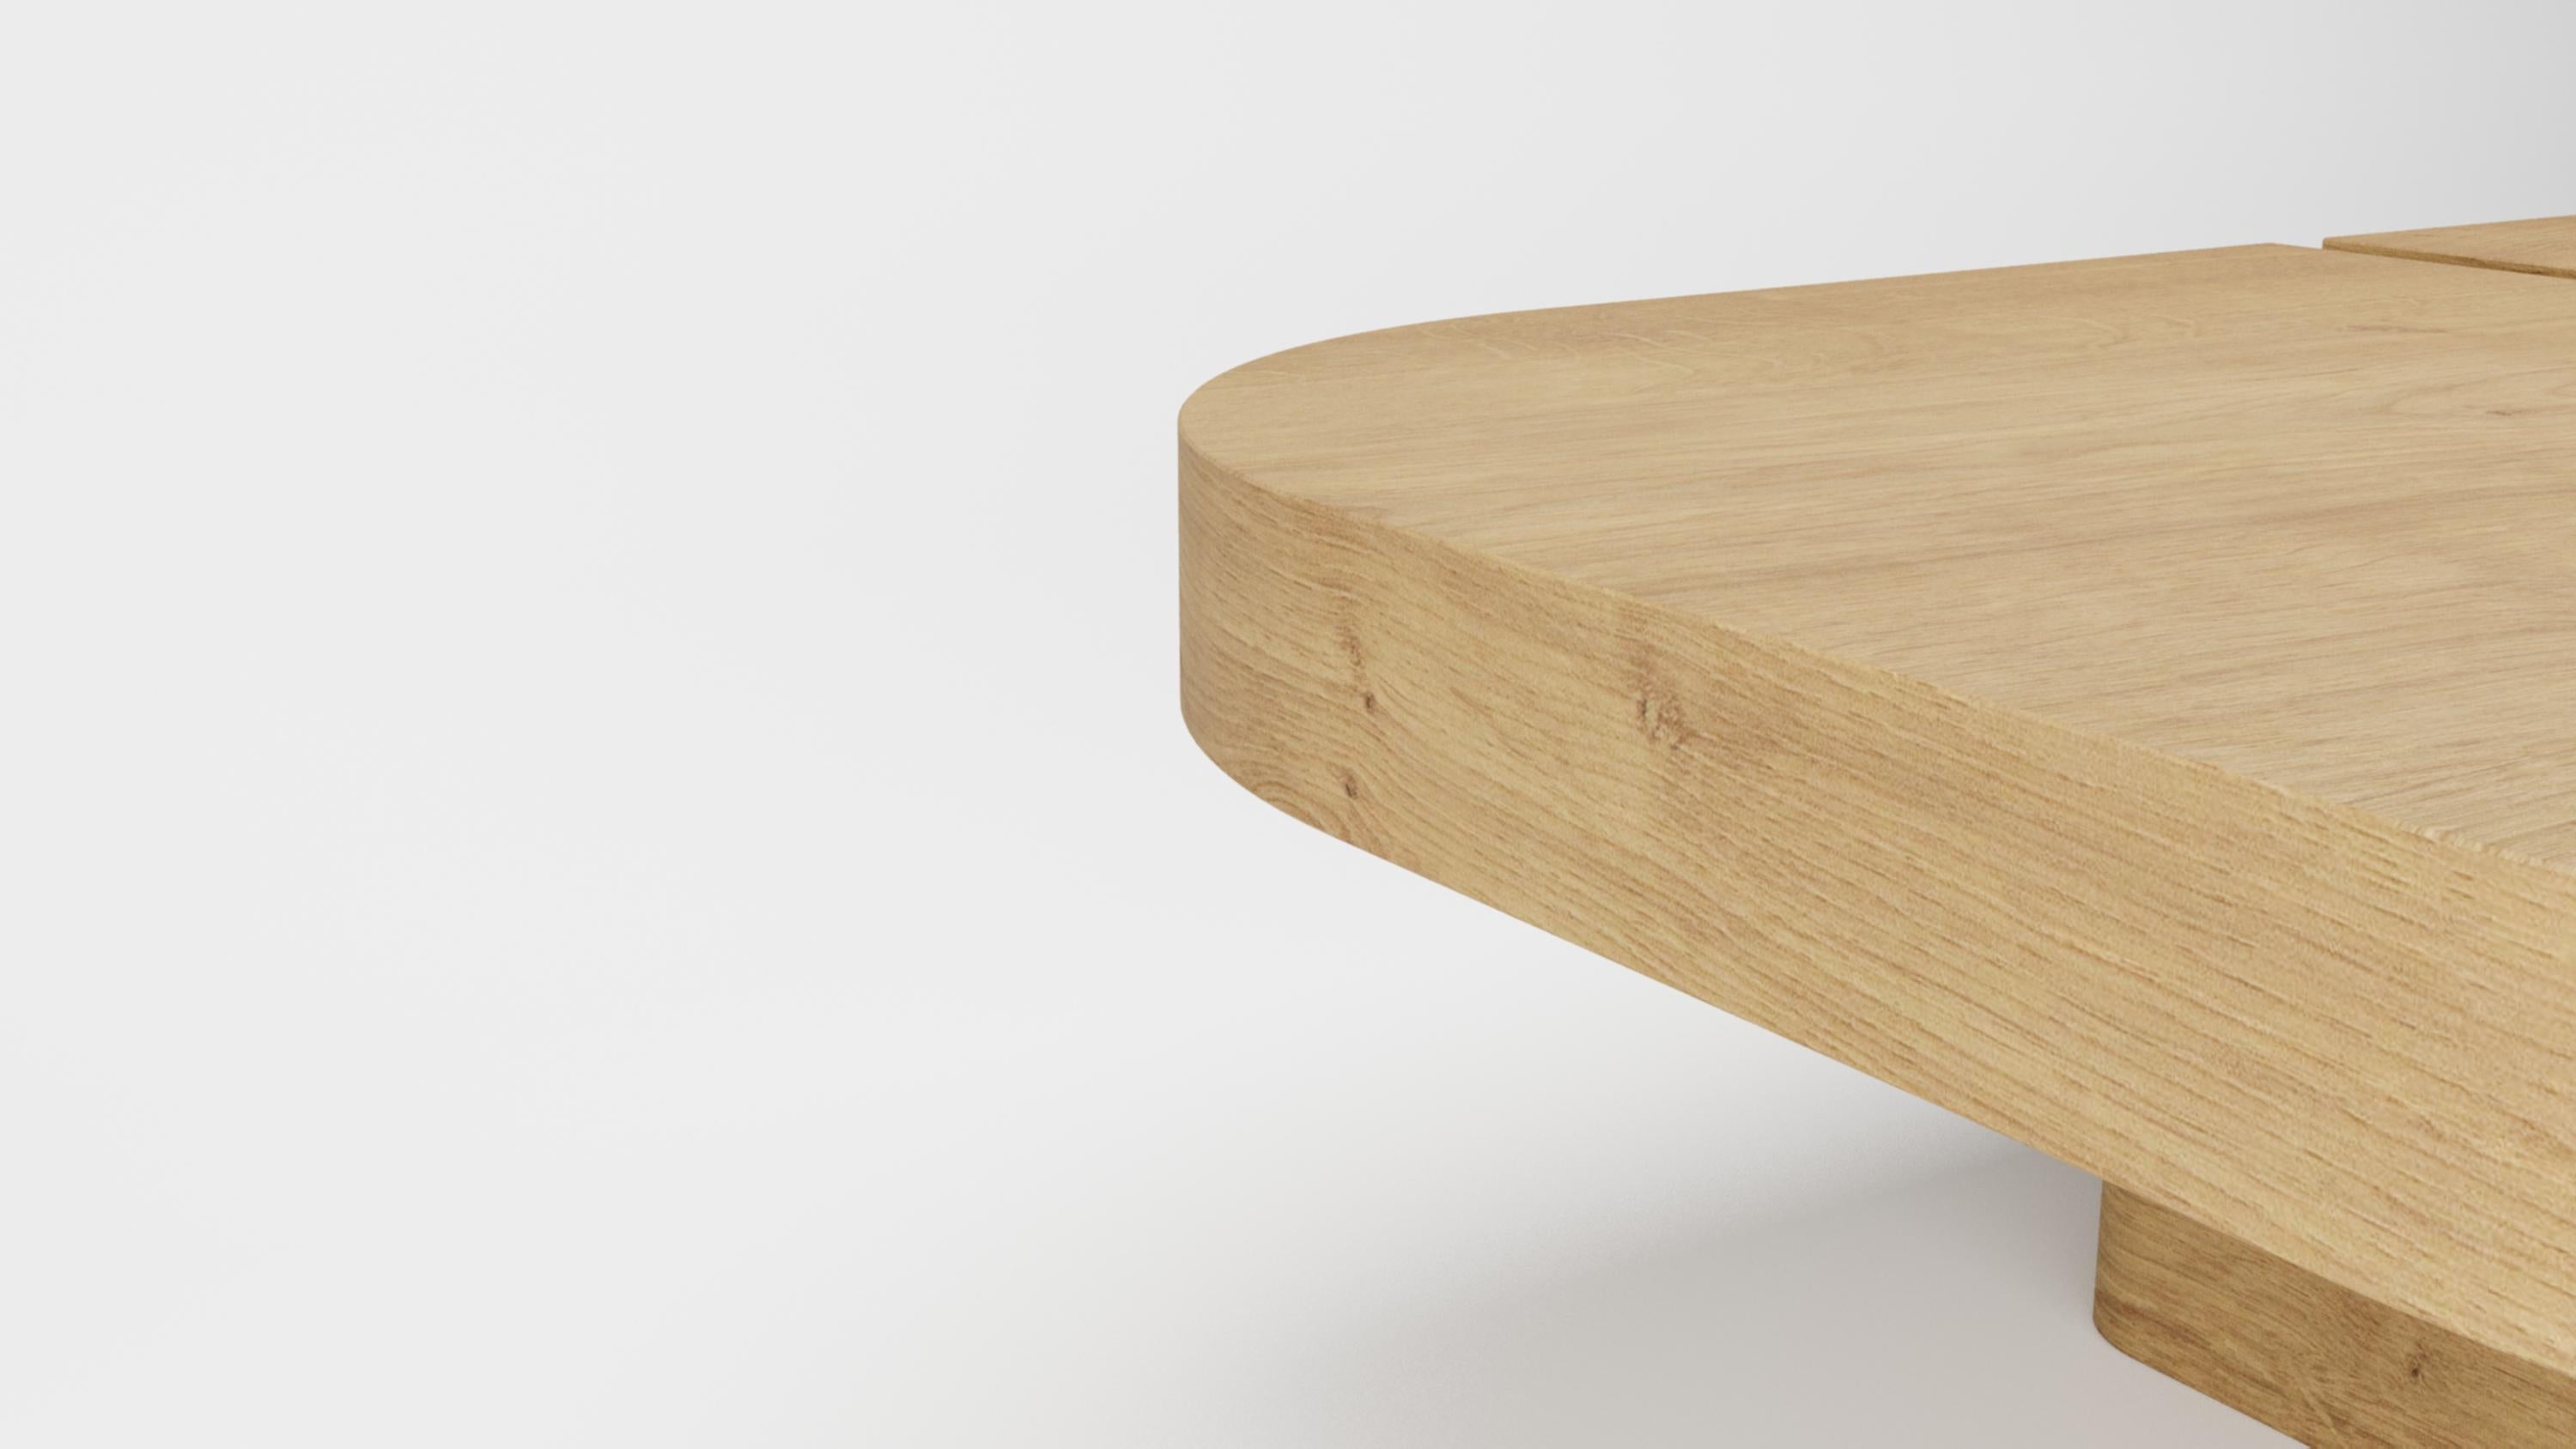 Collector - Designed by Studio Rig MecoCenter Table  Oak

Collector brand was born and Portugal and aims to be part of daily life by fusing furniture to home routines and lifestyles. The company designs its pieces with the intention to embrace